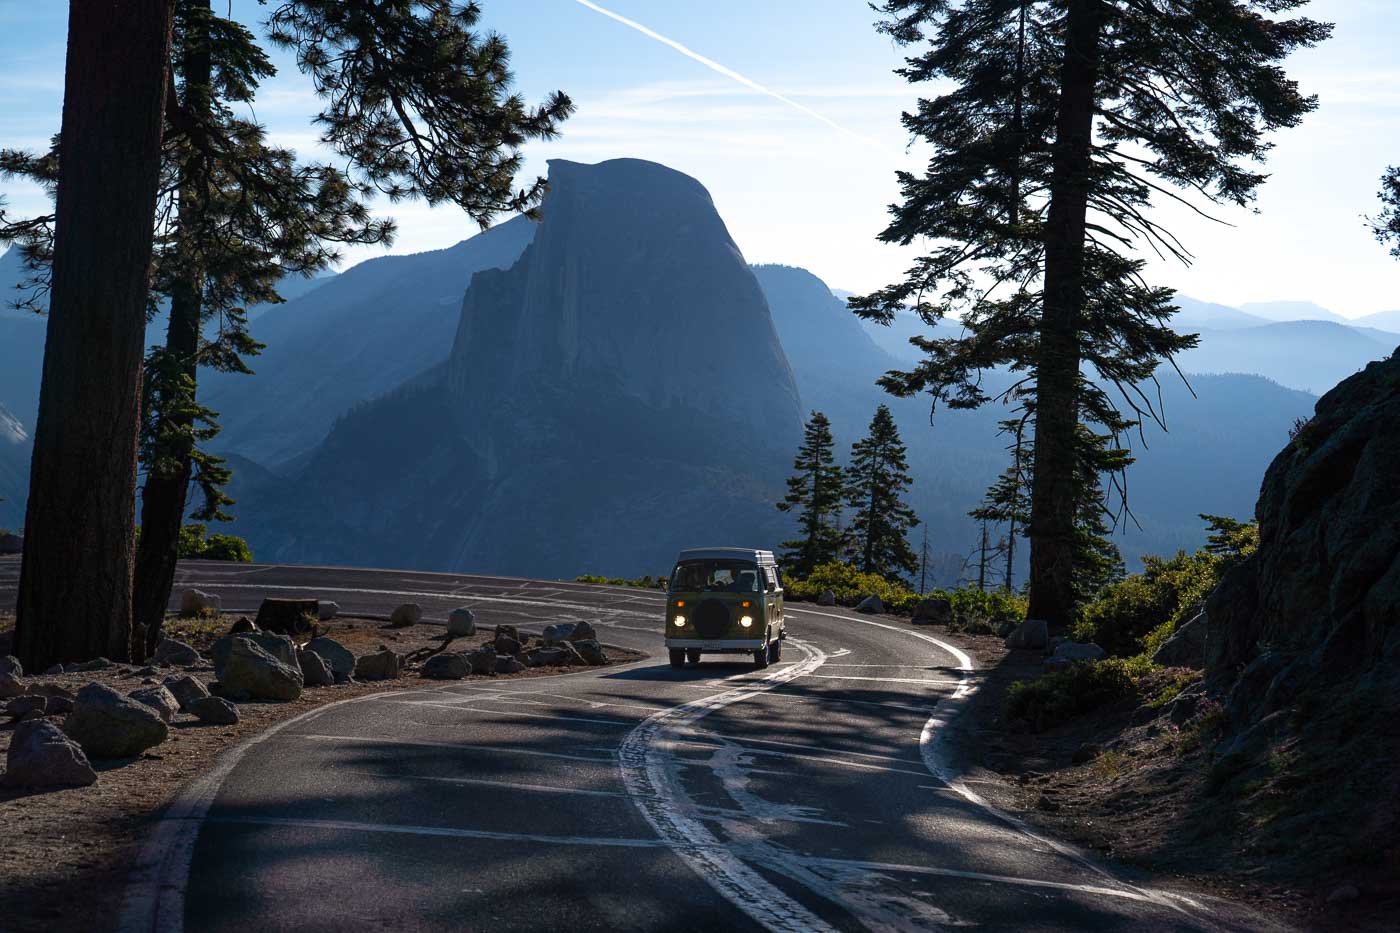 A VW Bus riding down turn in the road on Glacier Point Road with Half Dome in the background.